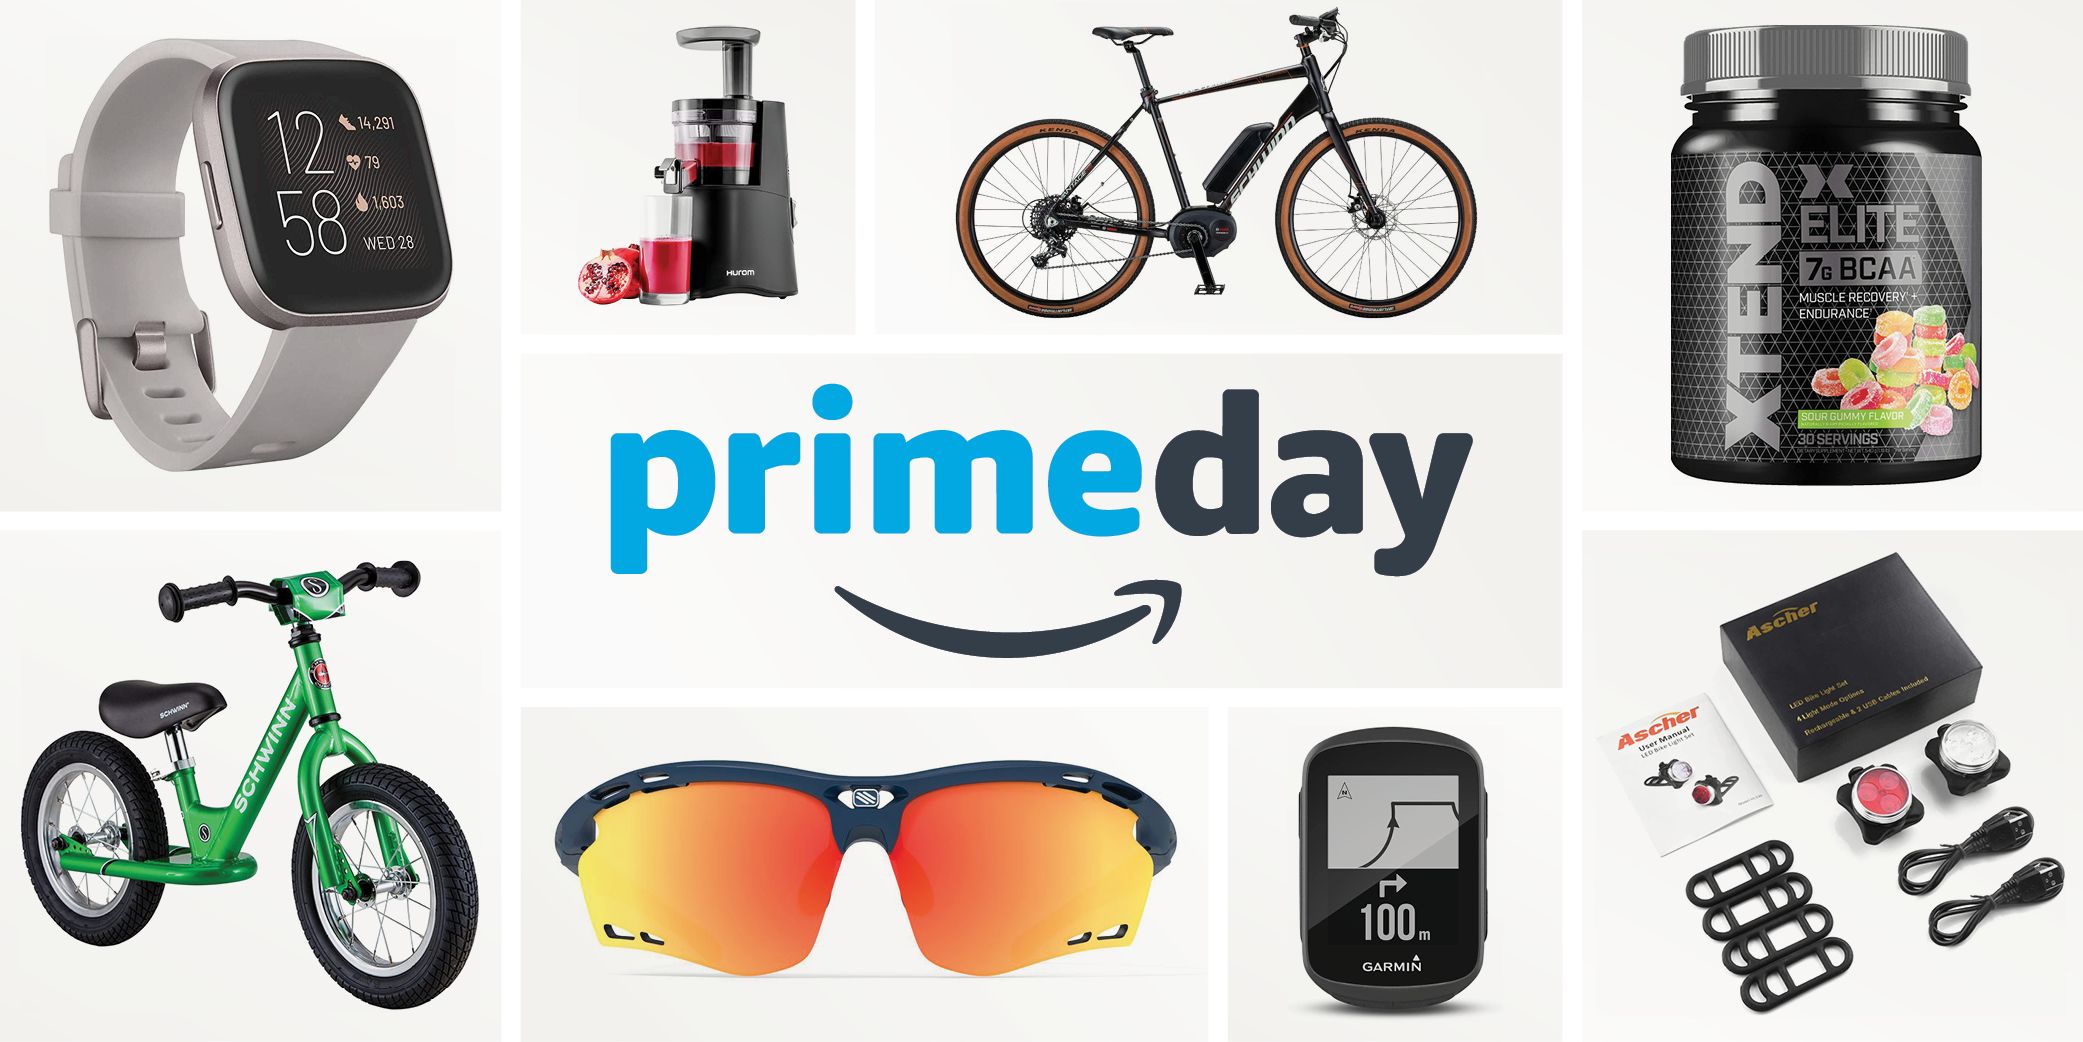 Amazon Prime Day 2020 The Best Prime Day Deals For Cyclists